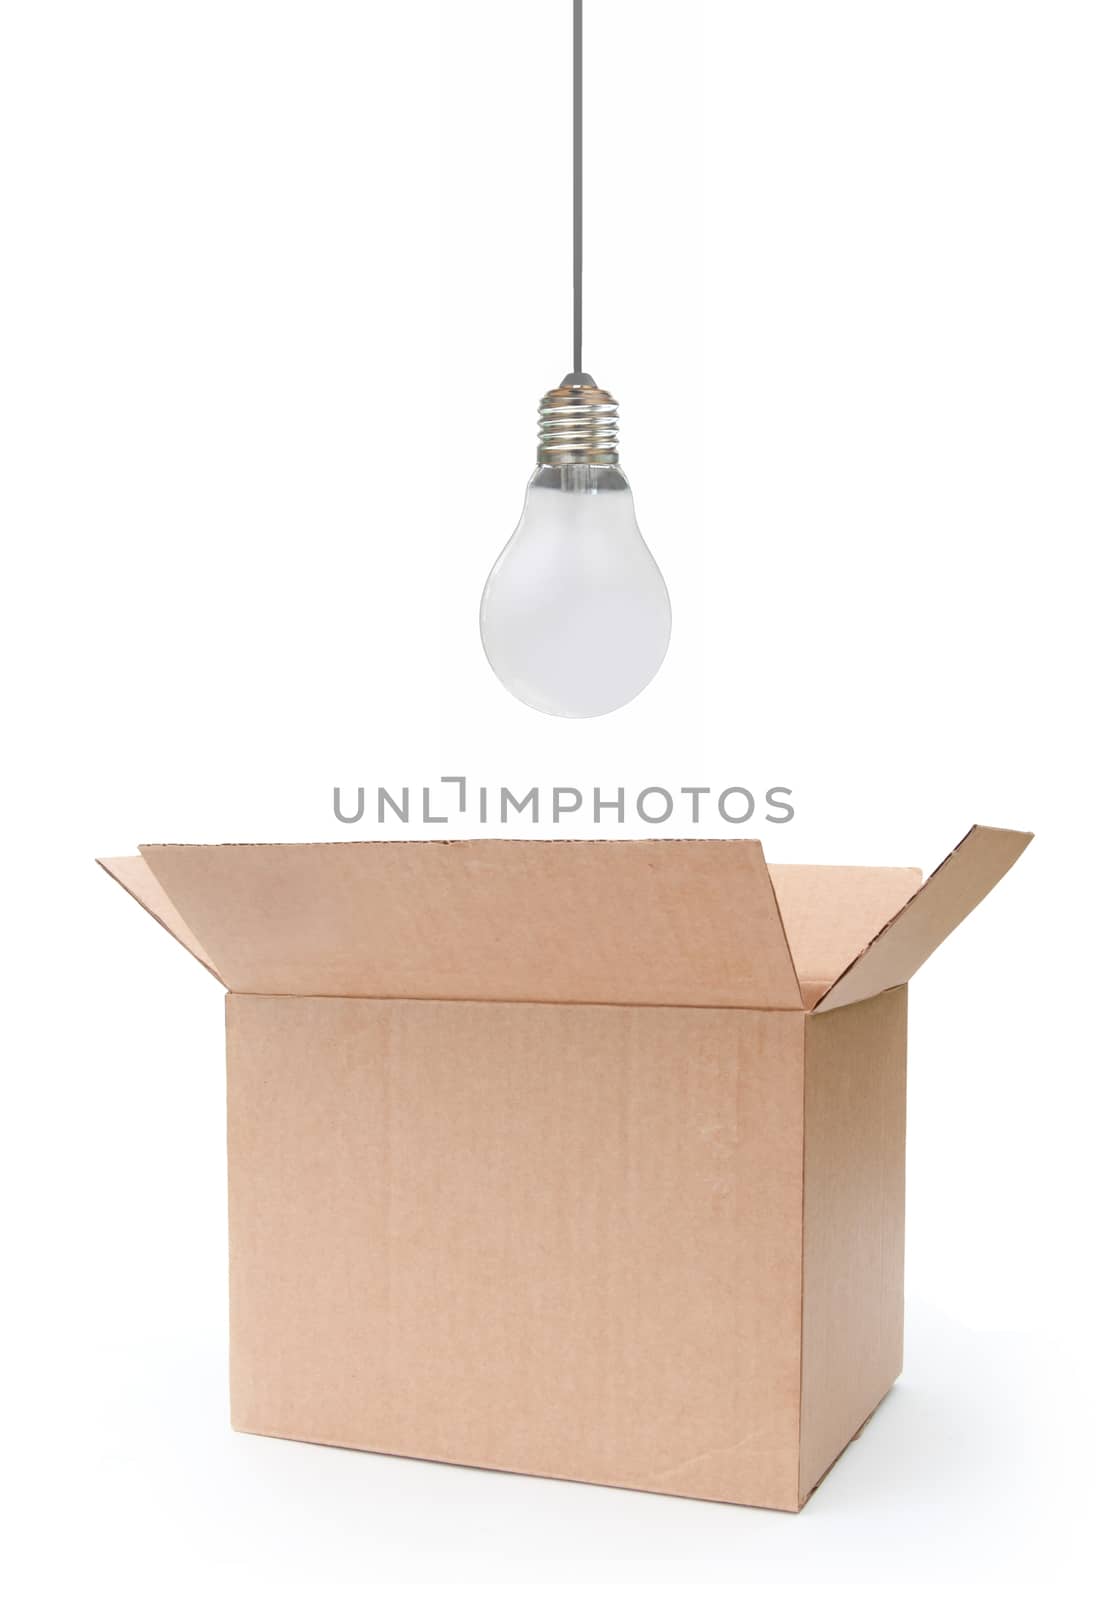 Light bulb hovering over an open box 